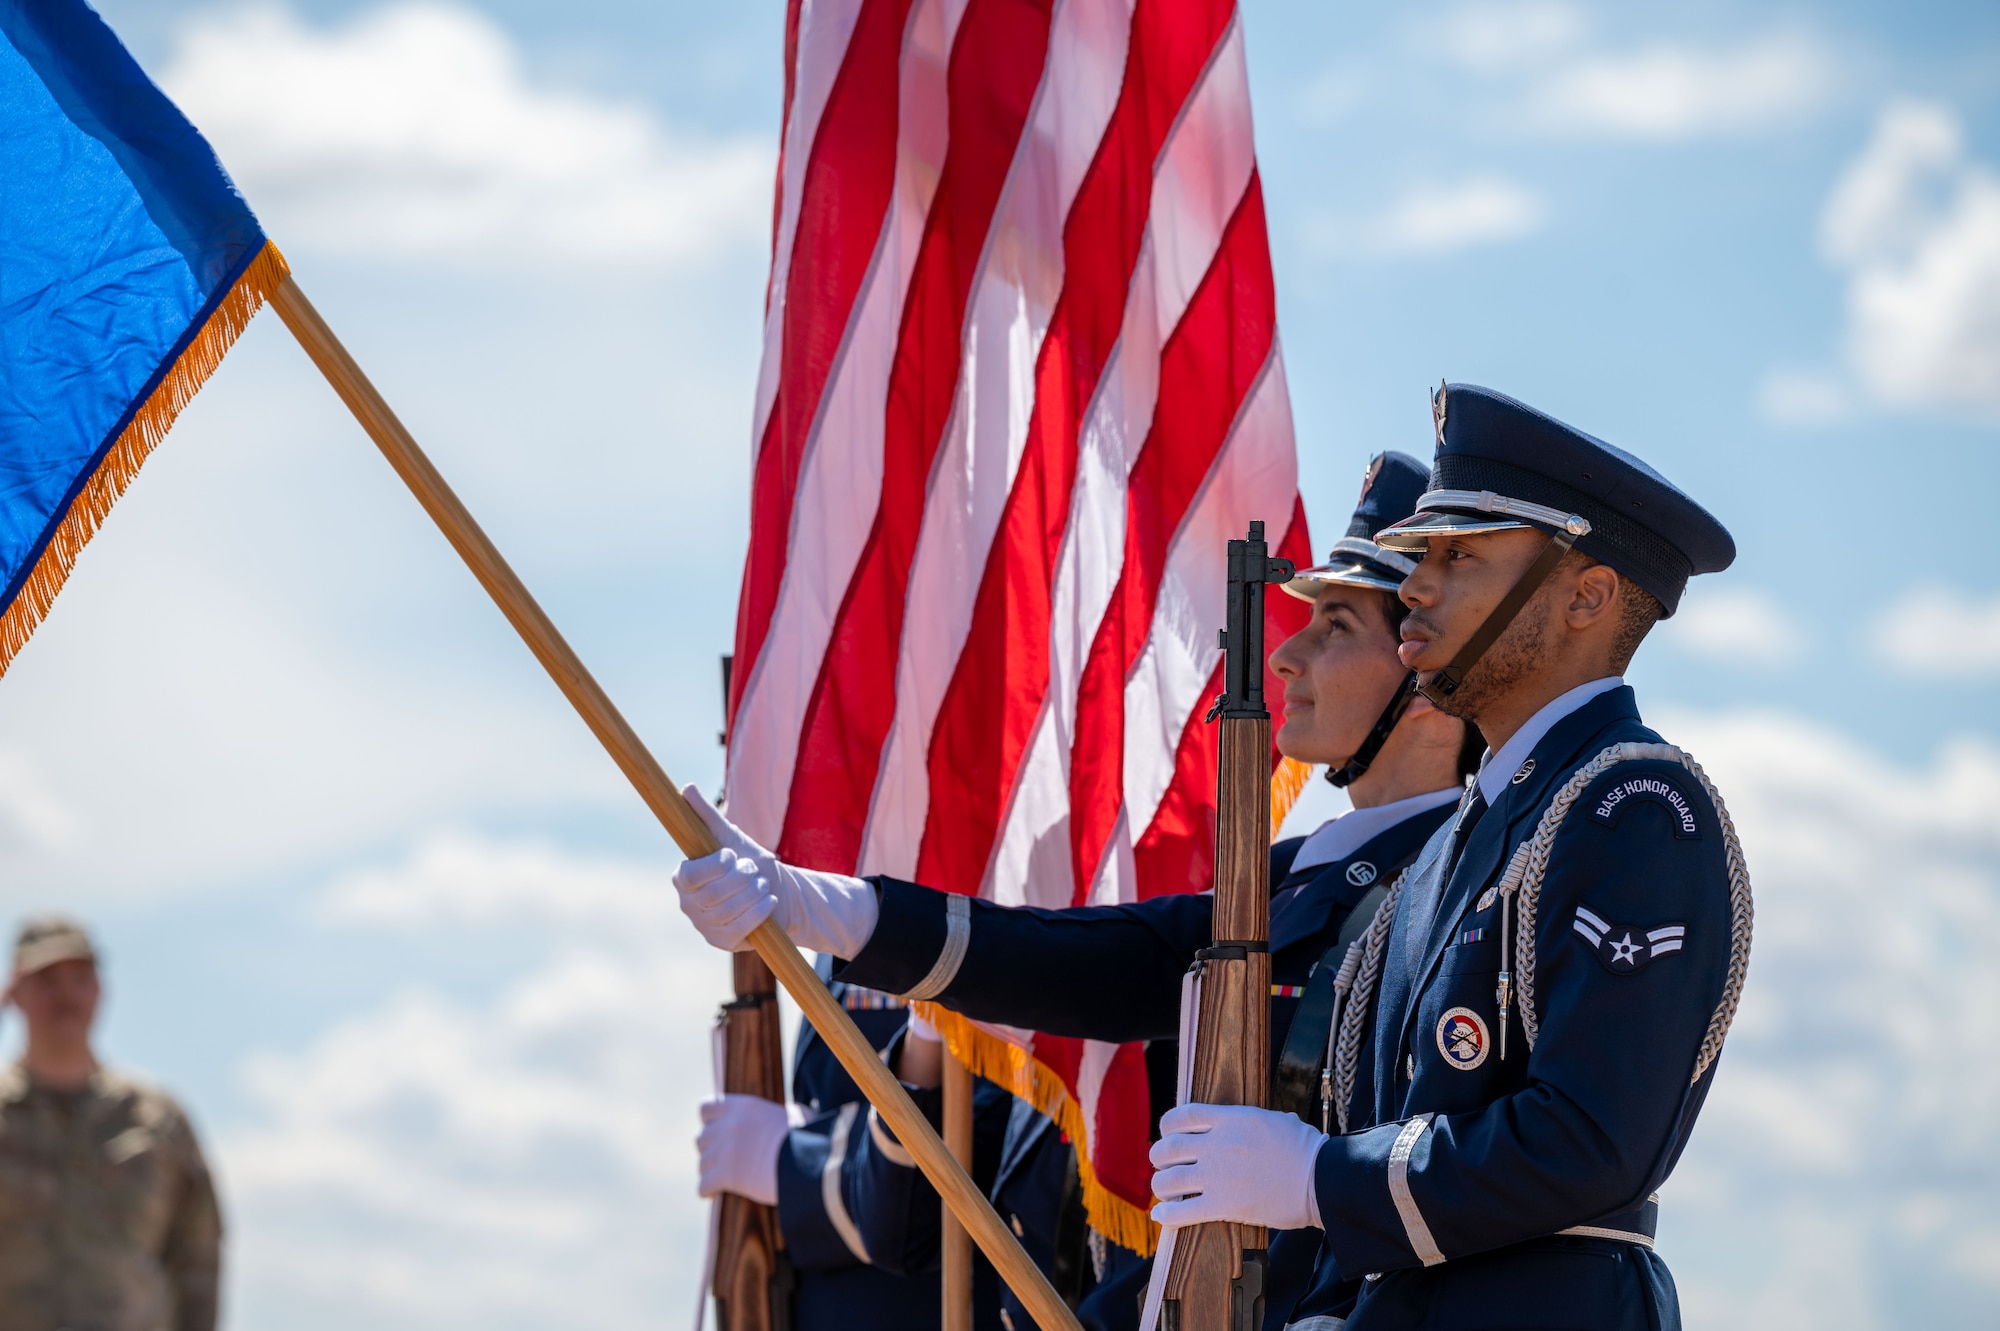 The Cannon Air Force Base Honor Guard presents the colors during the AC-130W Stinger II gunship static display unveiling at Cannon Air Force Base, New Mexico, March 21, 2024. The AC-130W Stinger II flew combat missions in support of Operation NEW DAWN, Operation ENDURING FREEDOM, Operation INHERENT RESOLVE, and more. (U.S. Air Force photo by 2nd Lt. Charles Moye)